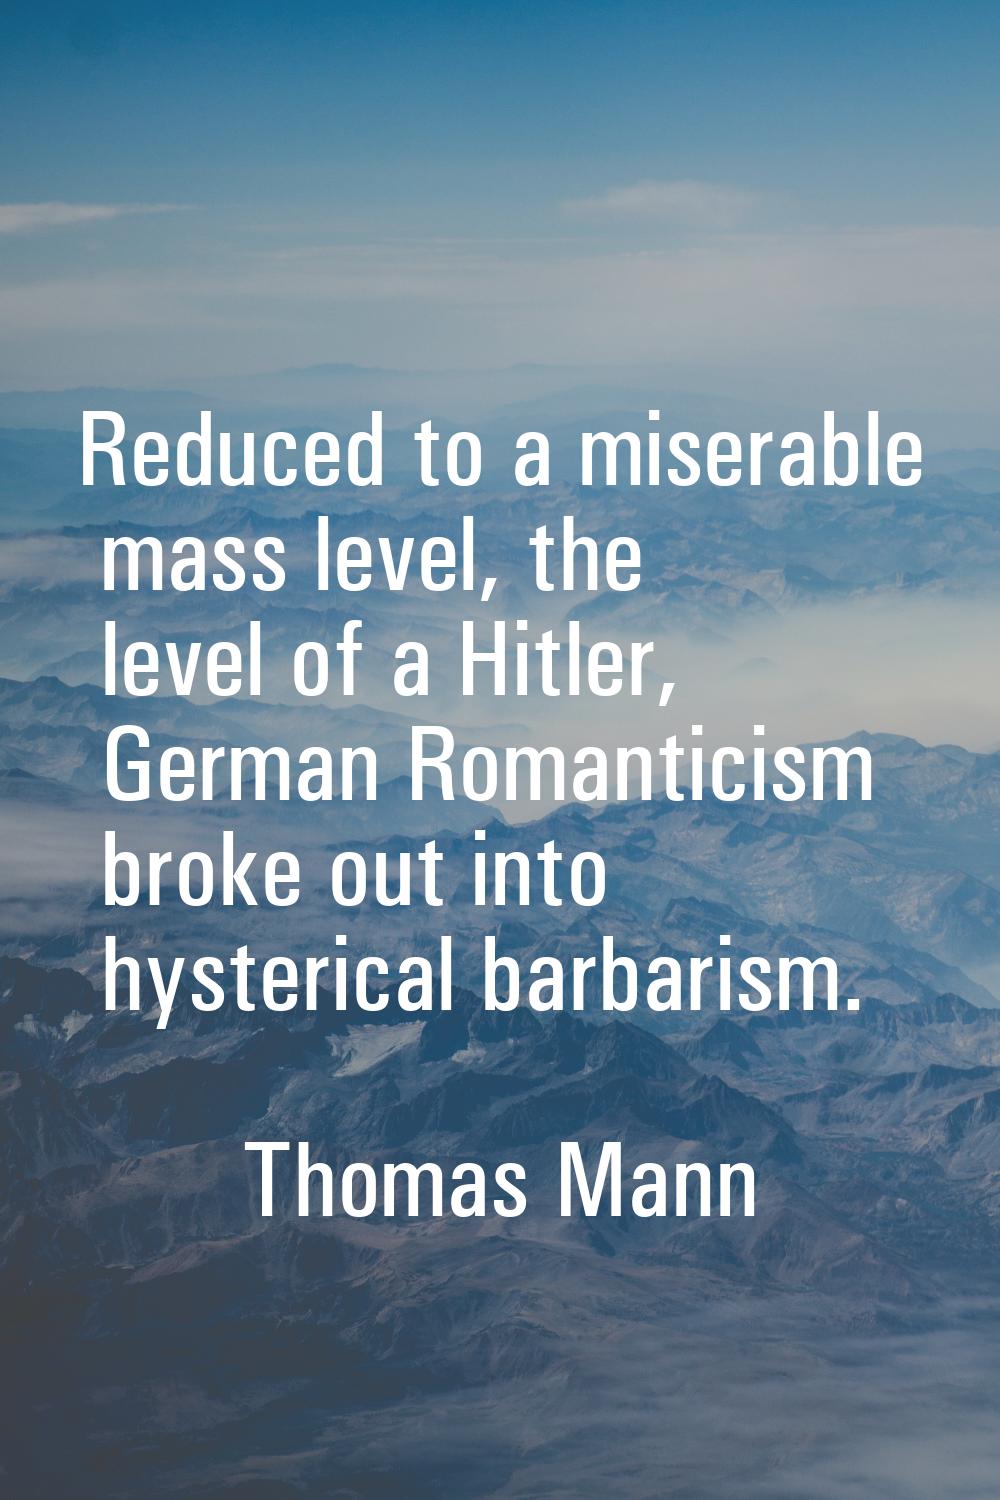 Reduced to a miserable mass level, the level of a Hitler, German Romanticism broke out into hysteri